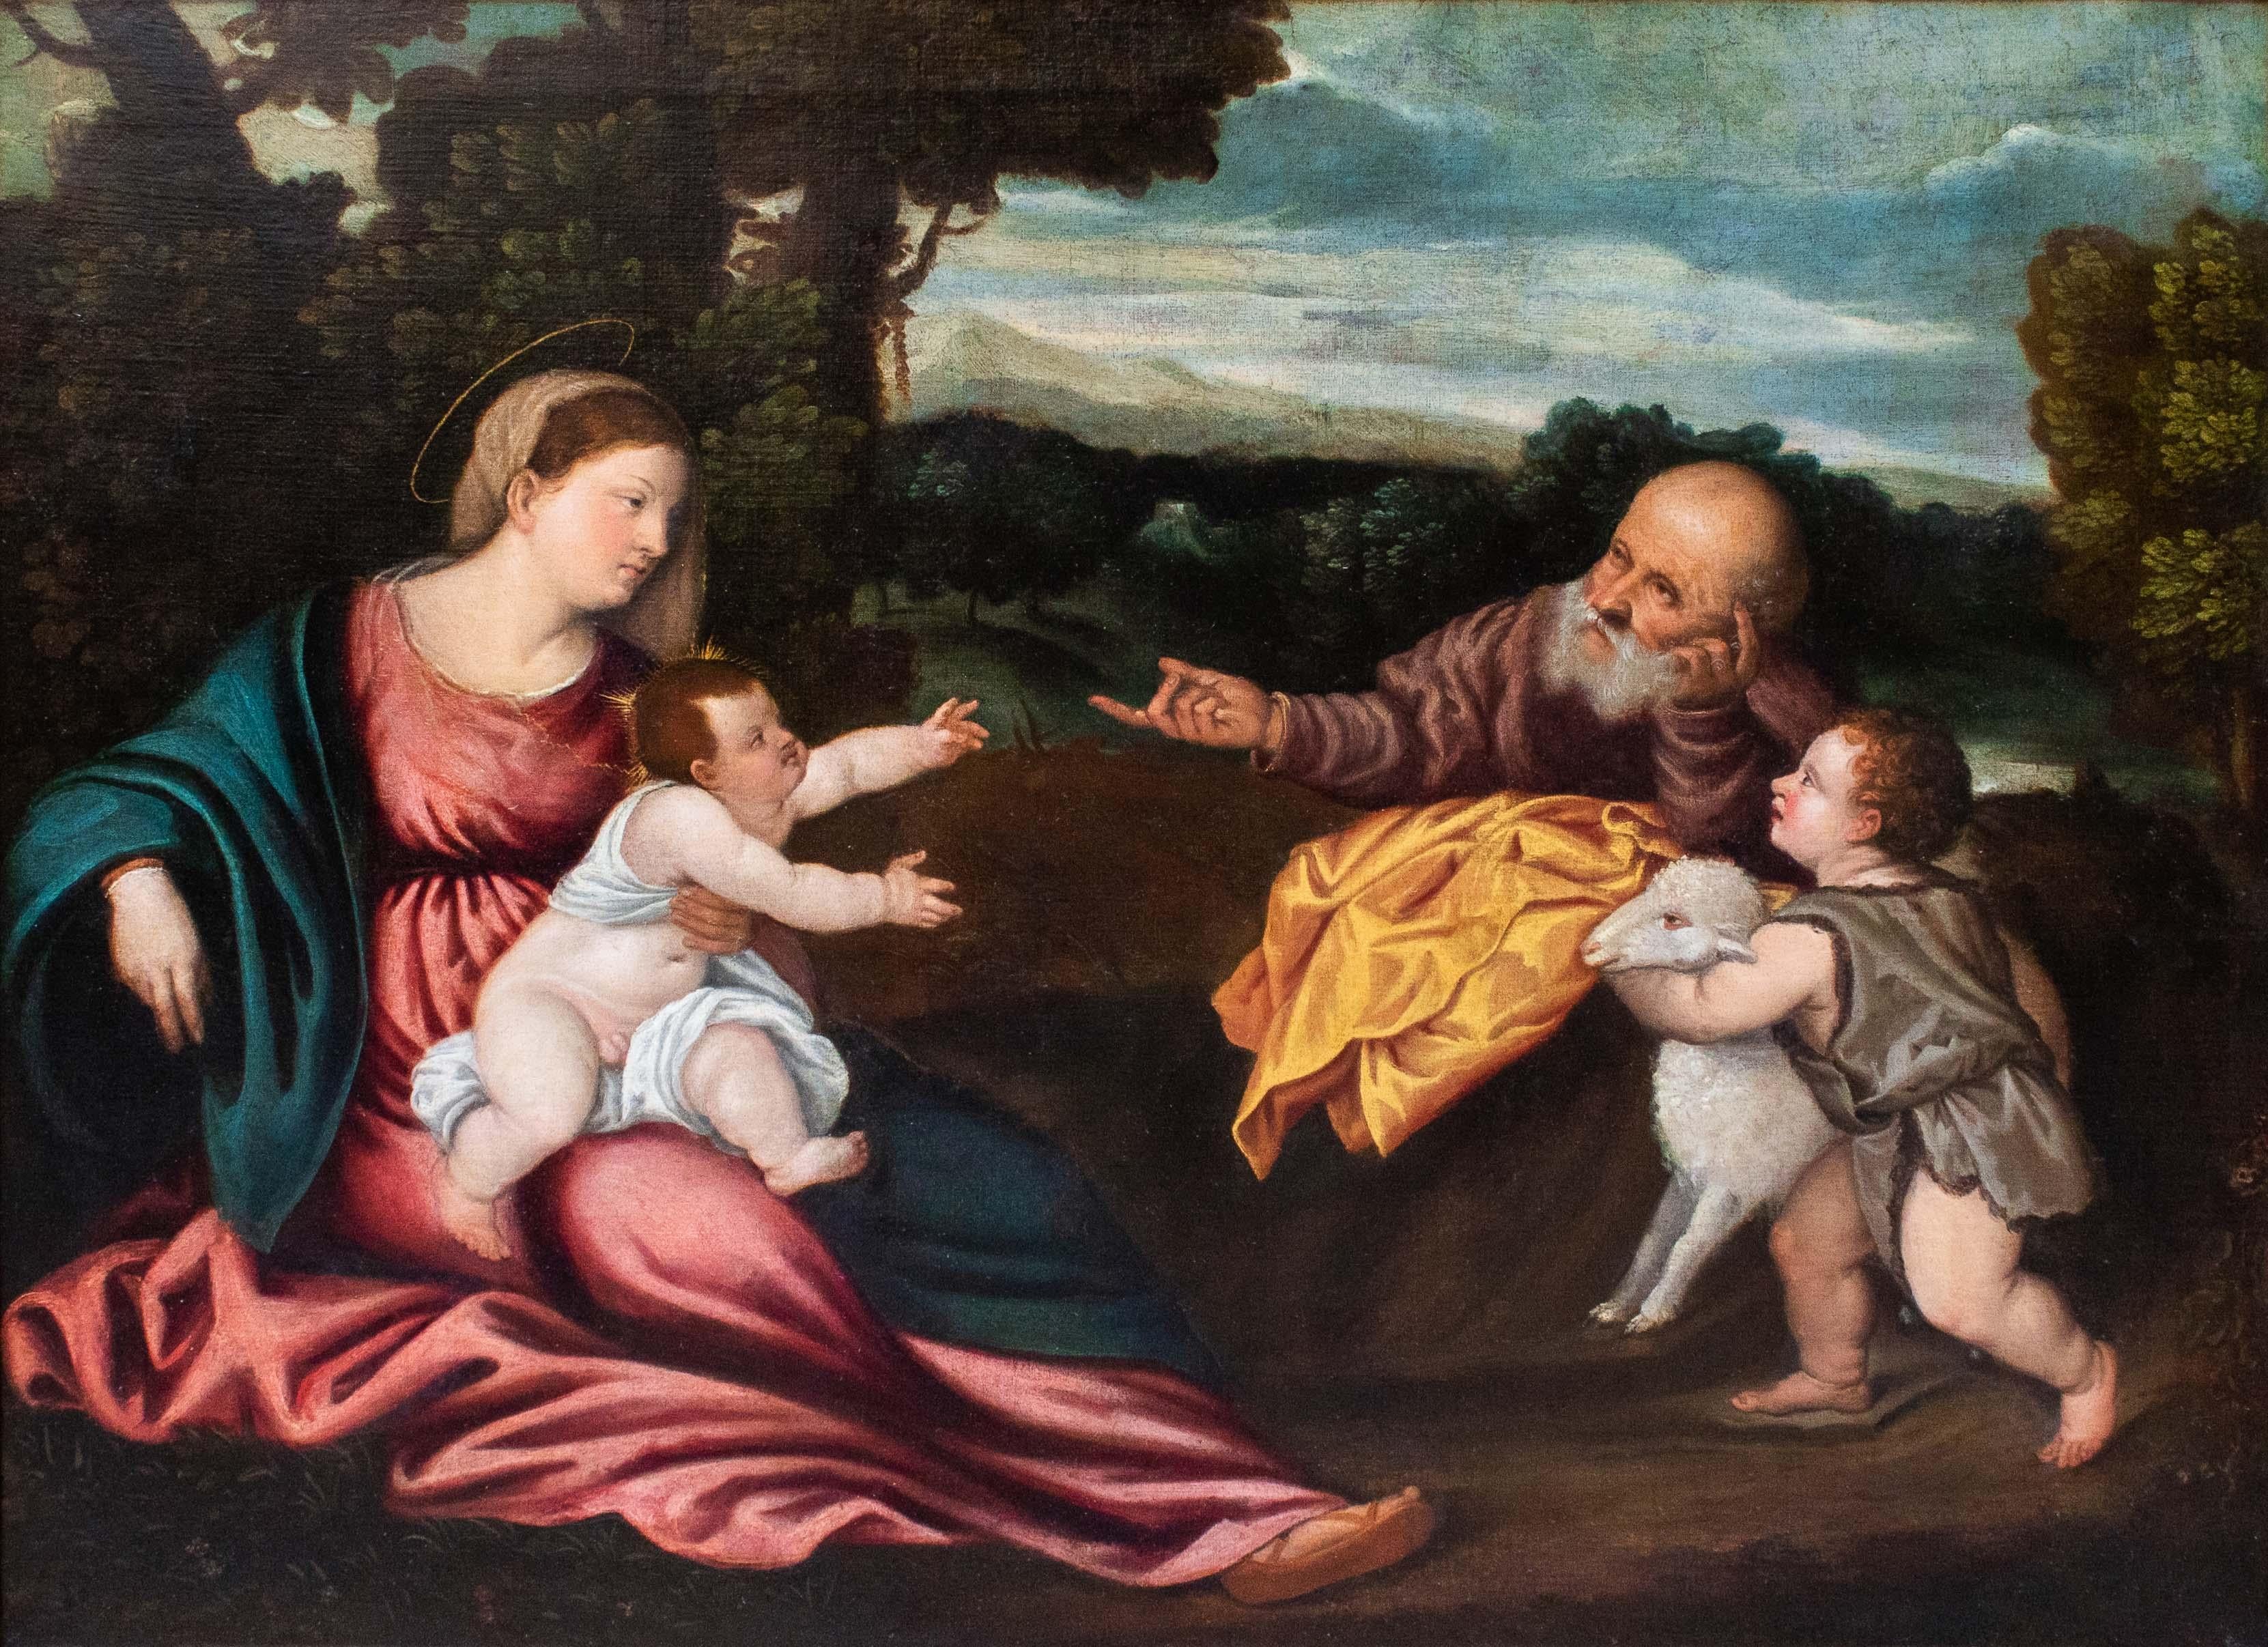 Workshop of Tiziano Vecellio (Pieve di Cadore, 1488/90 - Venice, 1576)
Holy Family with San Giovannino
Measures: Oil on canvas, 79 x 103 cm - with frame 95.5 x 119.5 cm

This painting derives from an invention by Titian, setting itself according